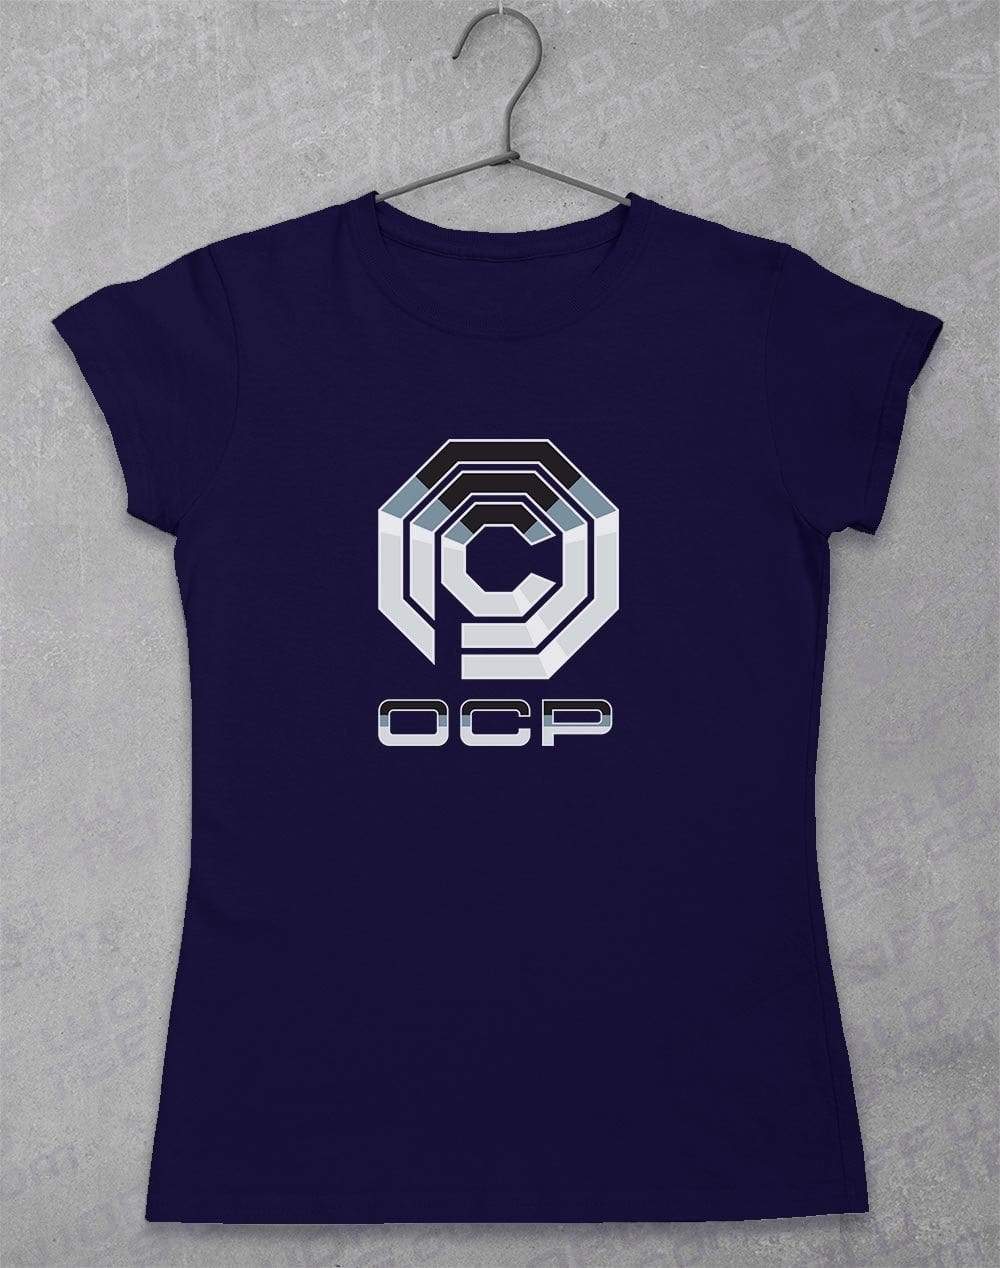 Omni Consumer Products - Women's T-Shirt 8-10 / Navy  - Off World Tees